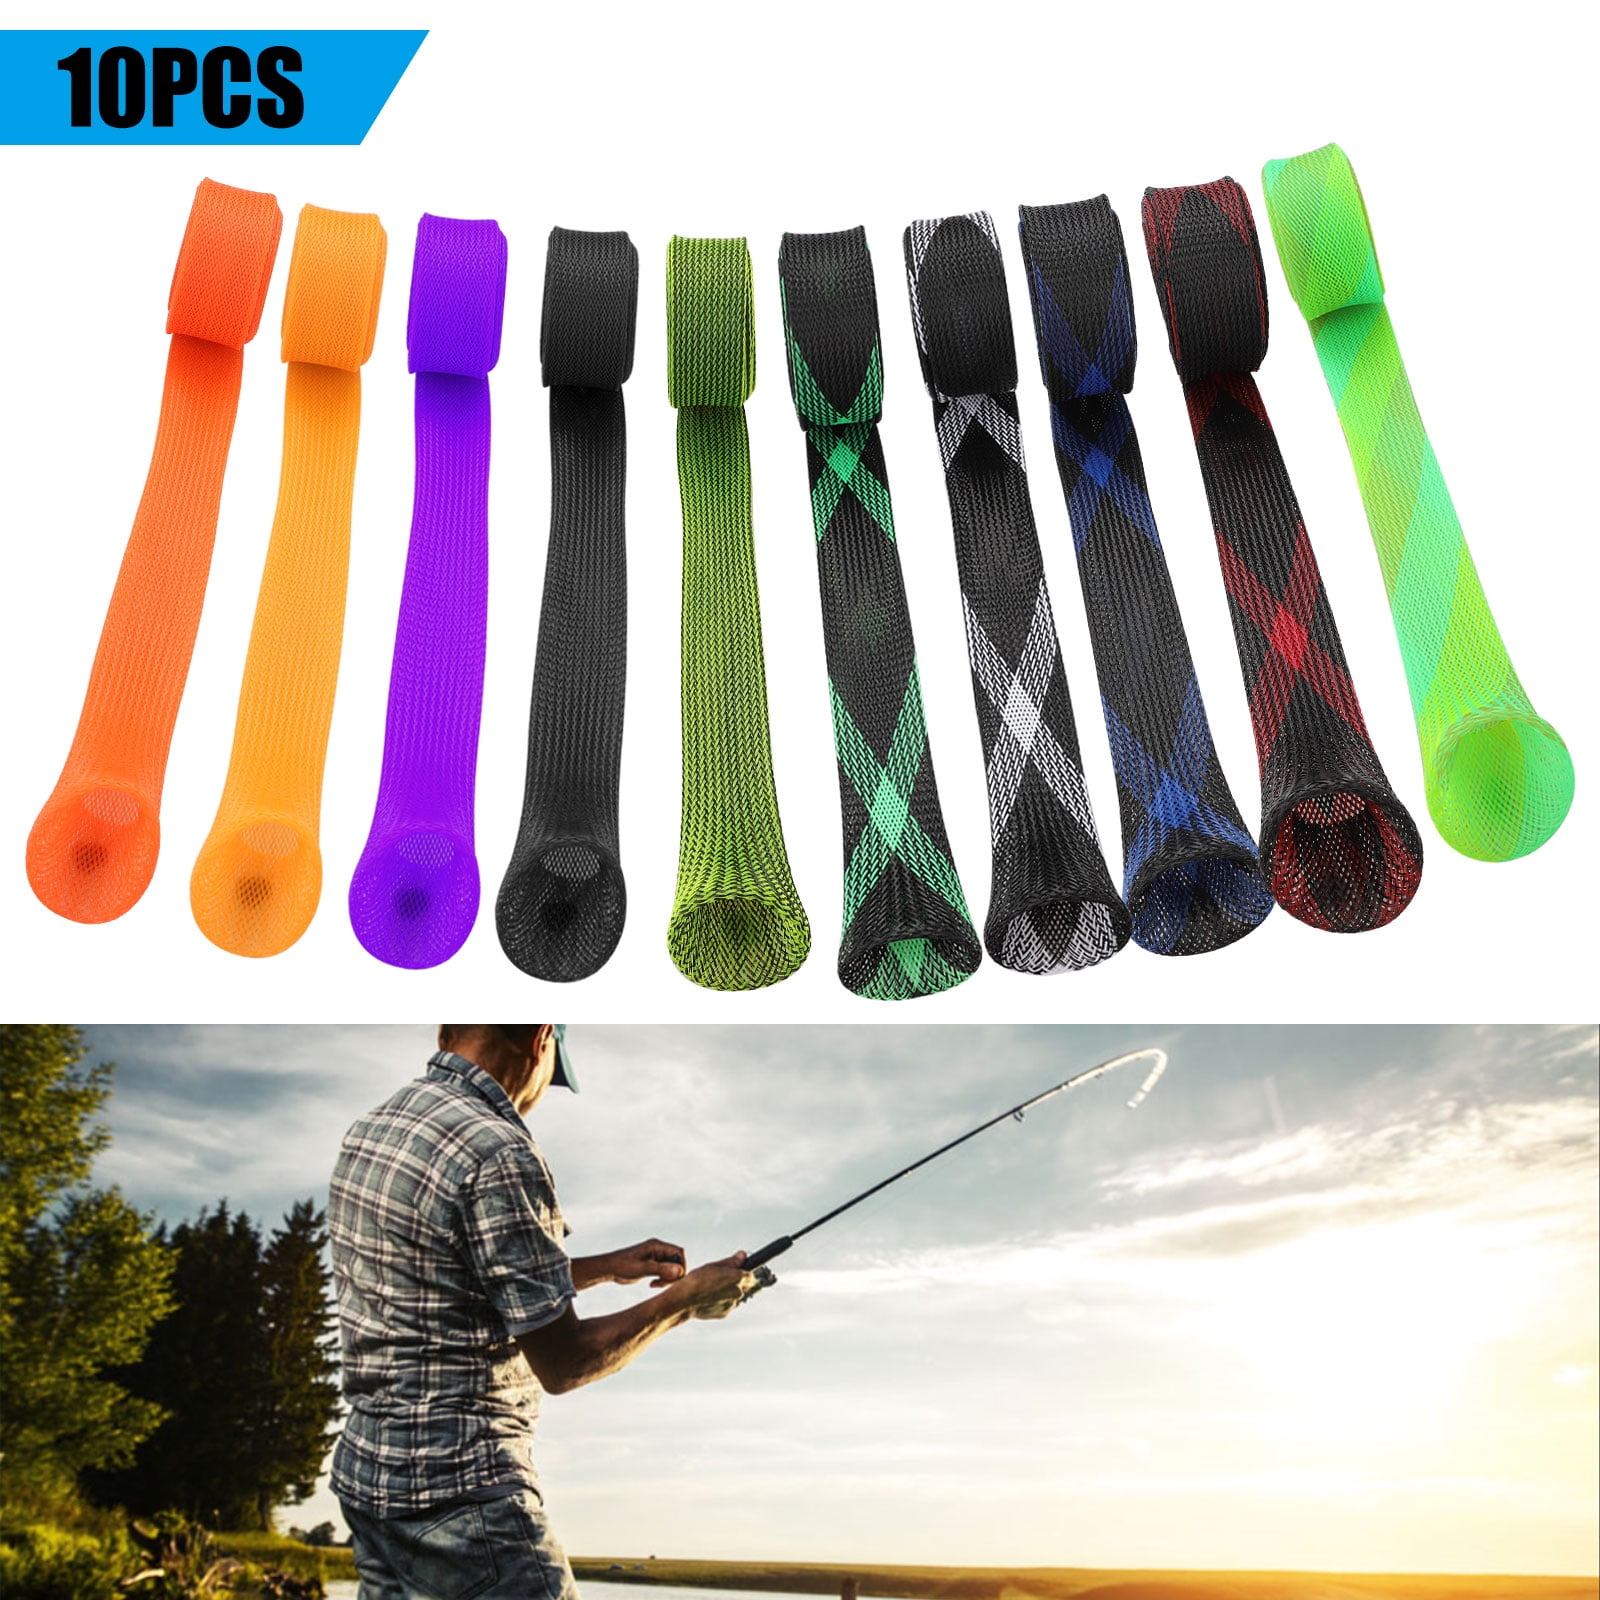 Xhope 170cm 5 Packs Casting Fishing Rod Sleeve Cover,Fishing Spinning Rod Cover Pole Glover Tip Protector Bags Sock Fishing Tool